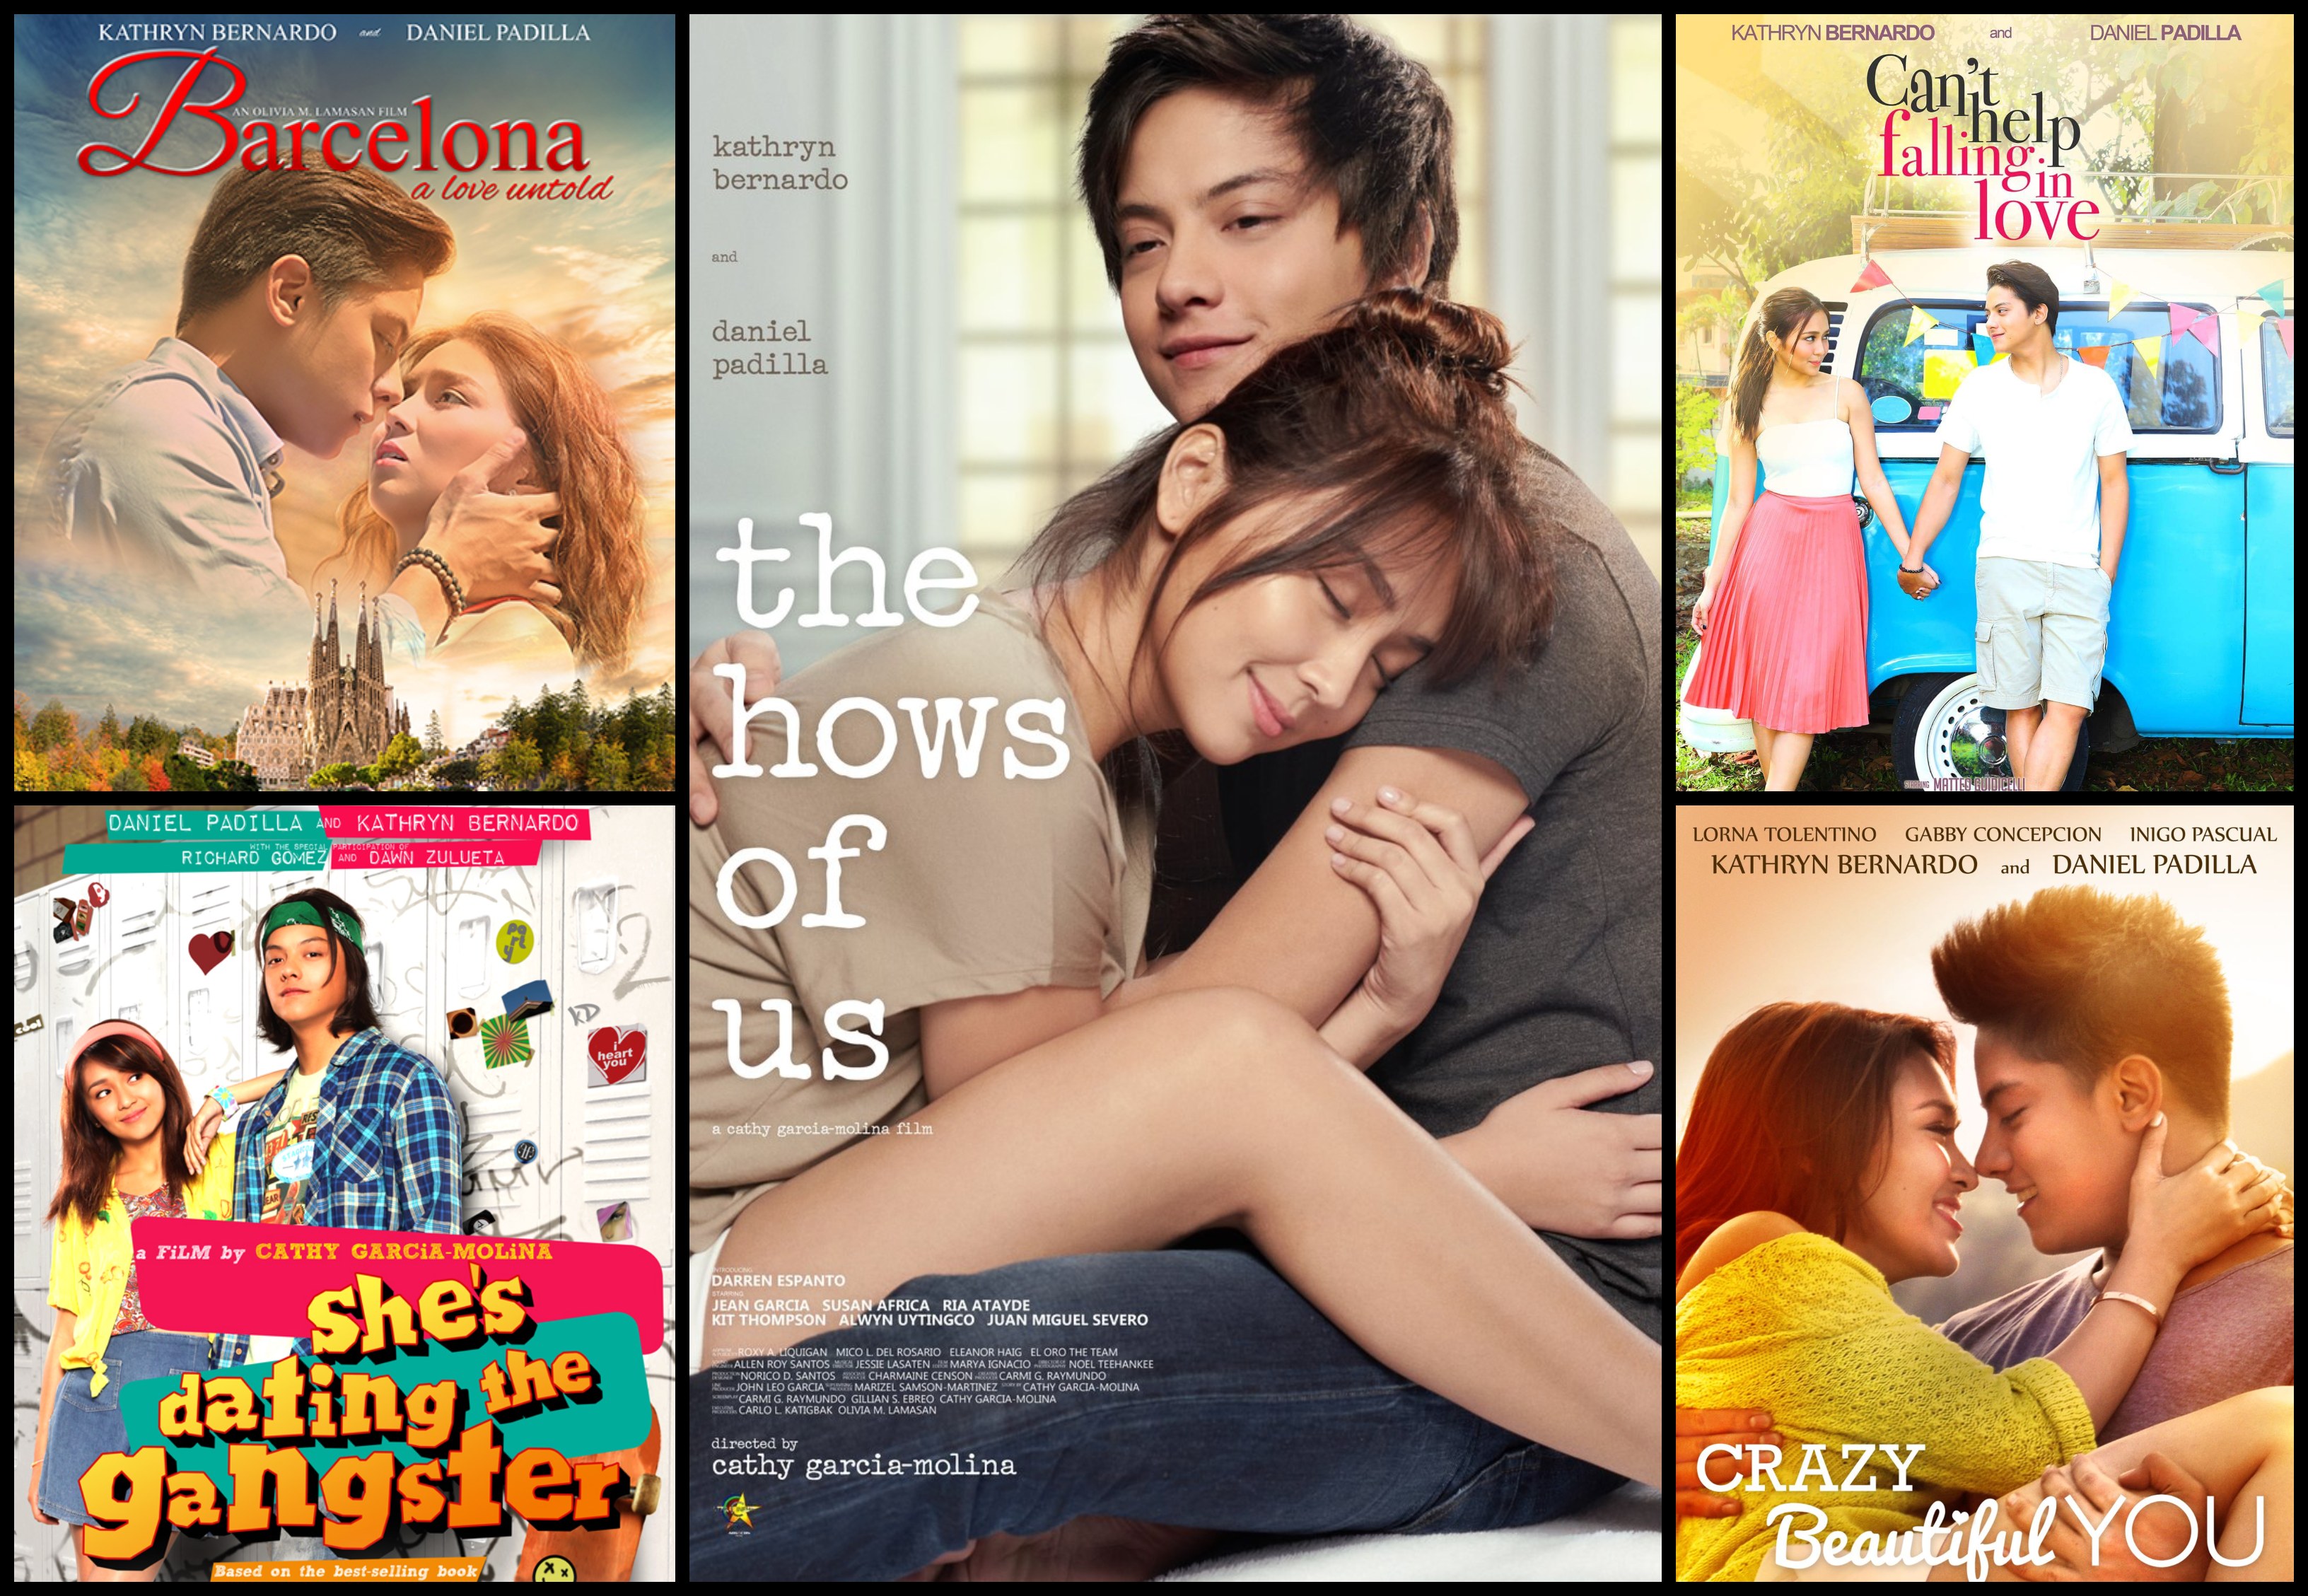 ABS-CBN's top grossing films to be adapted for Indian film market